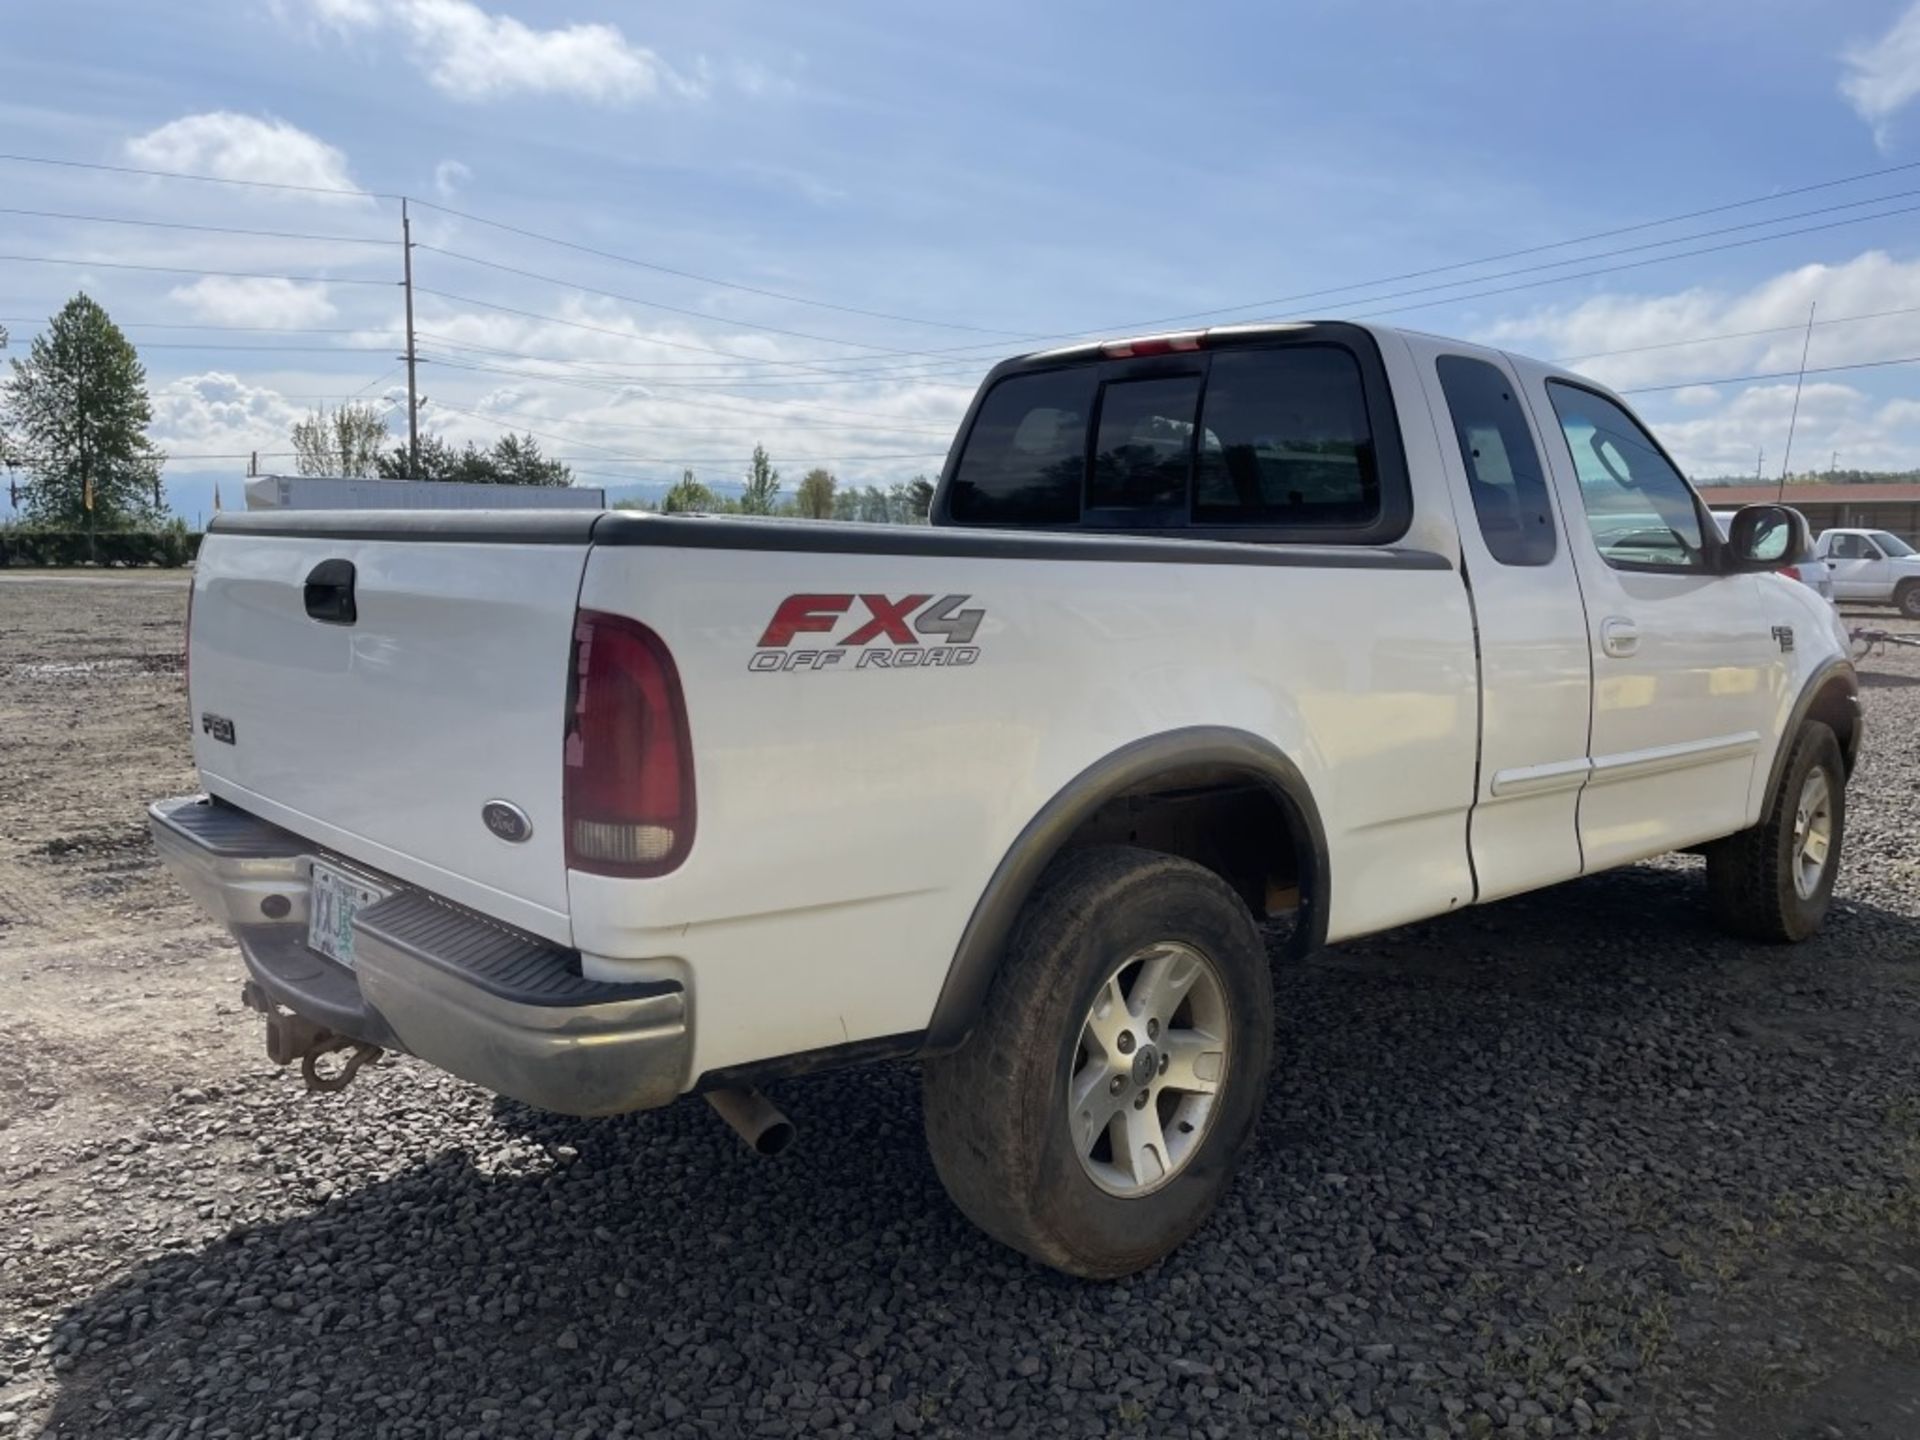 2002 Ford F150 XLT 4x4 Extra Cab Pickup - Image 3 of 20